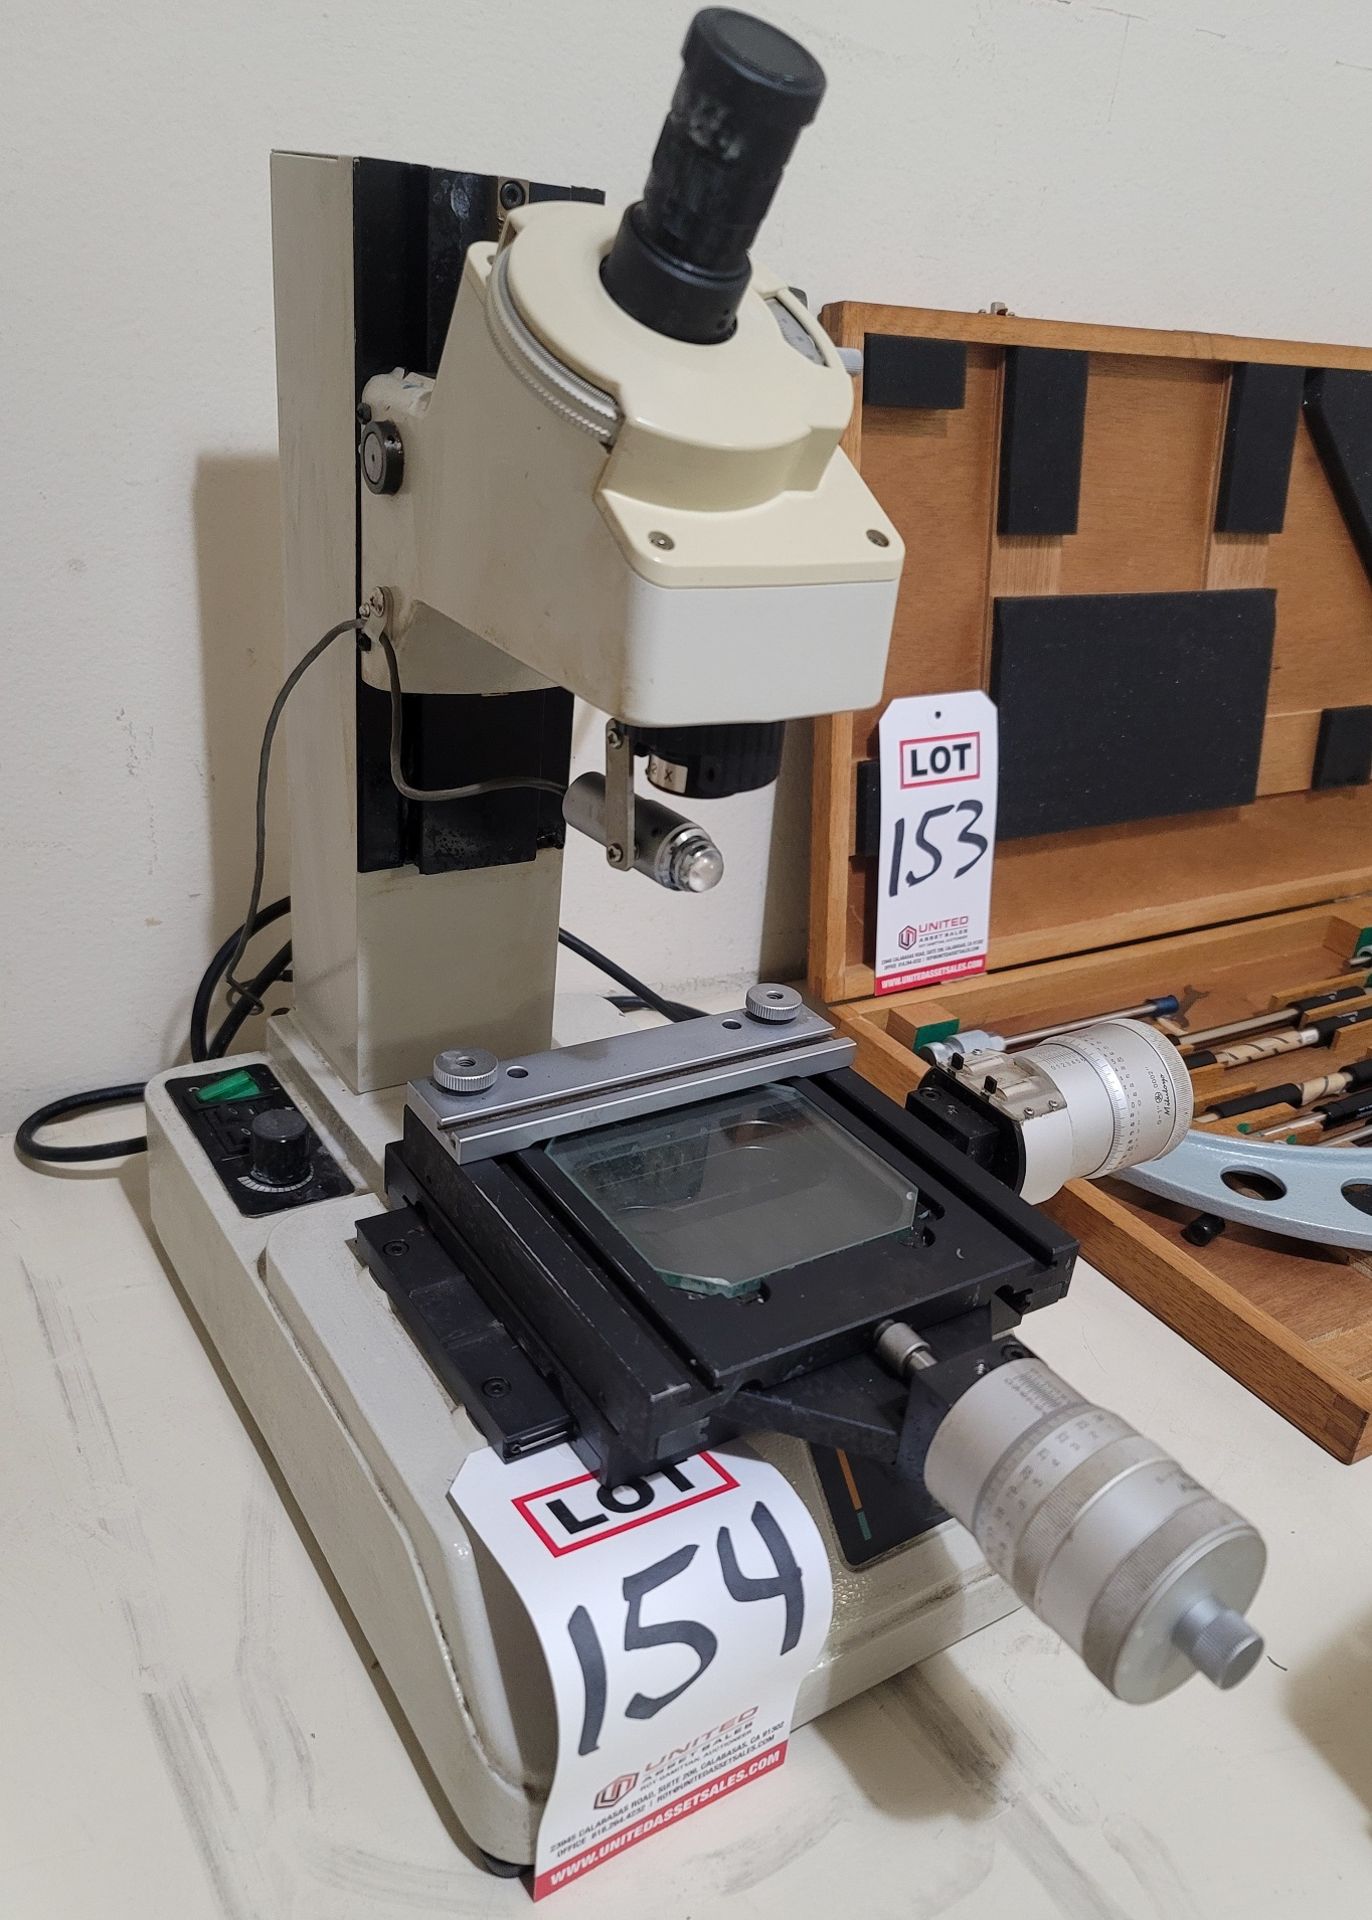 MITUTOYO TOOLMAKER'S MICROSCOPE, NO. 176-811A, S/N 040131